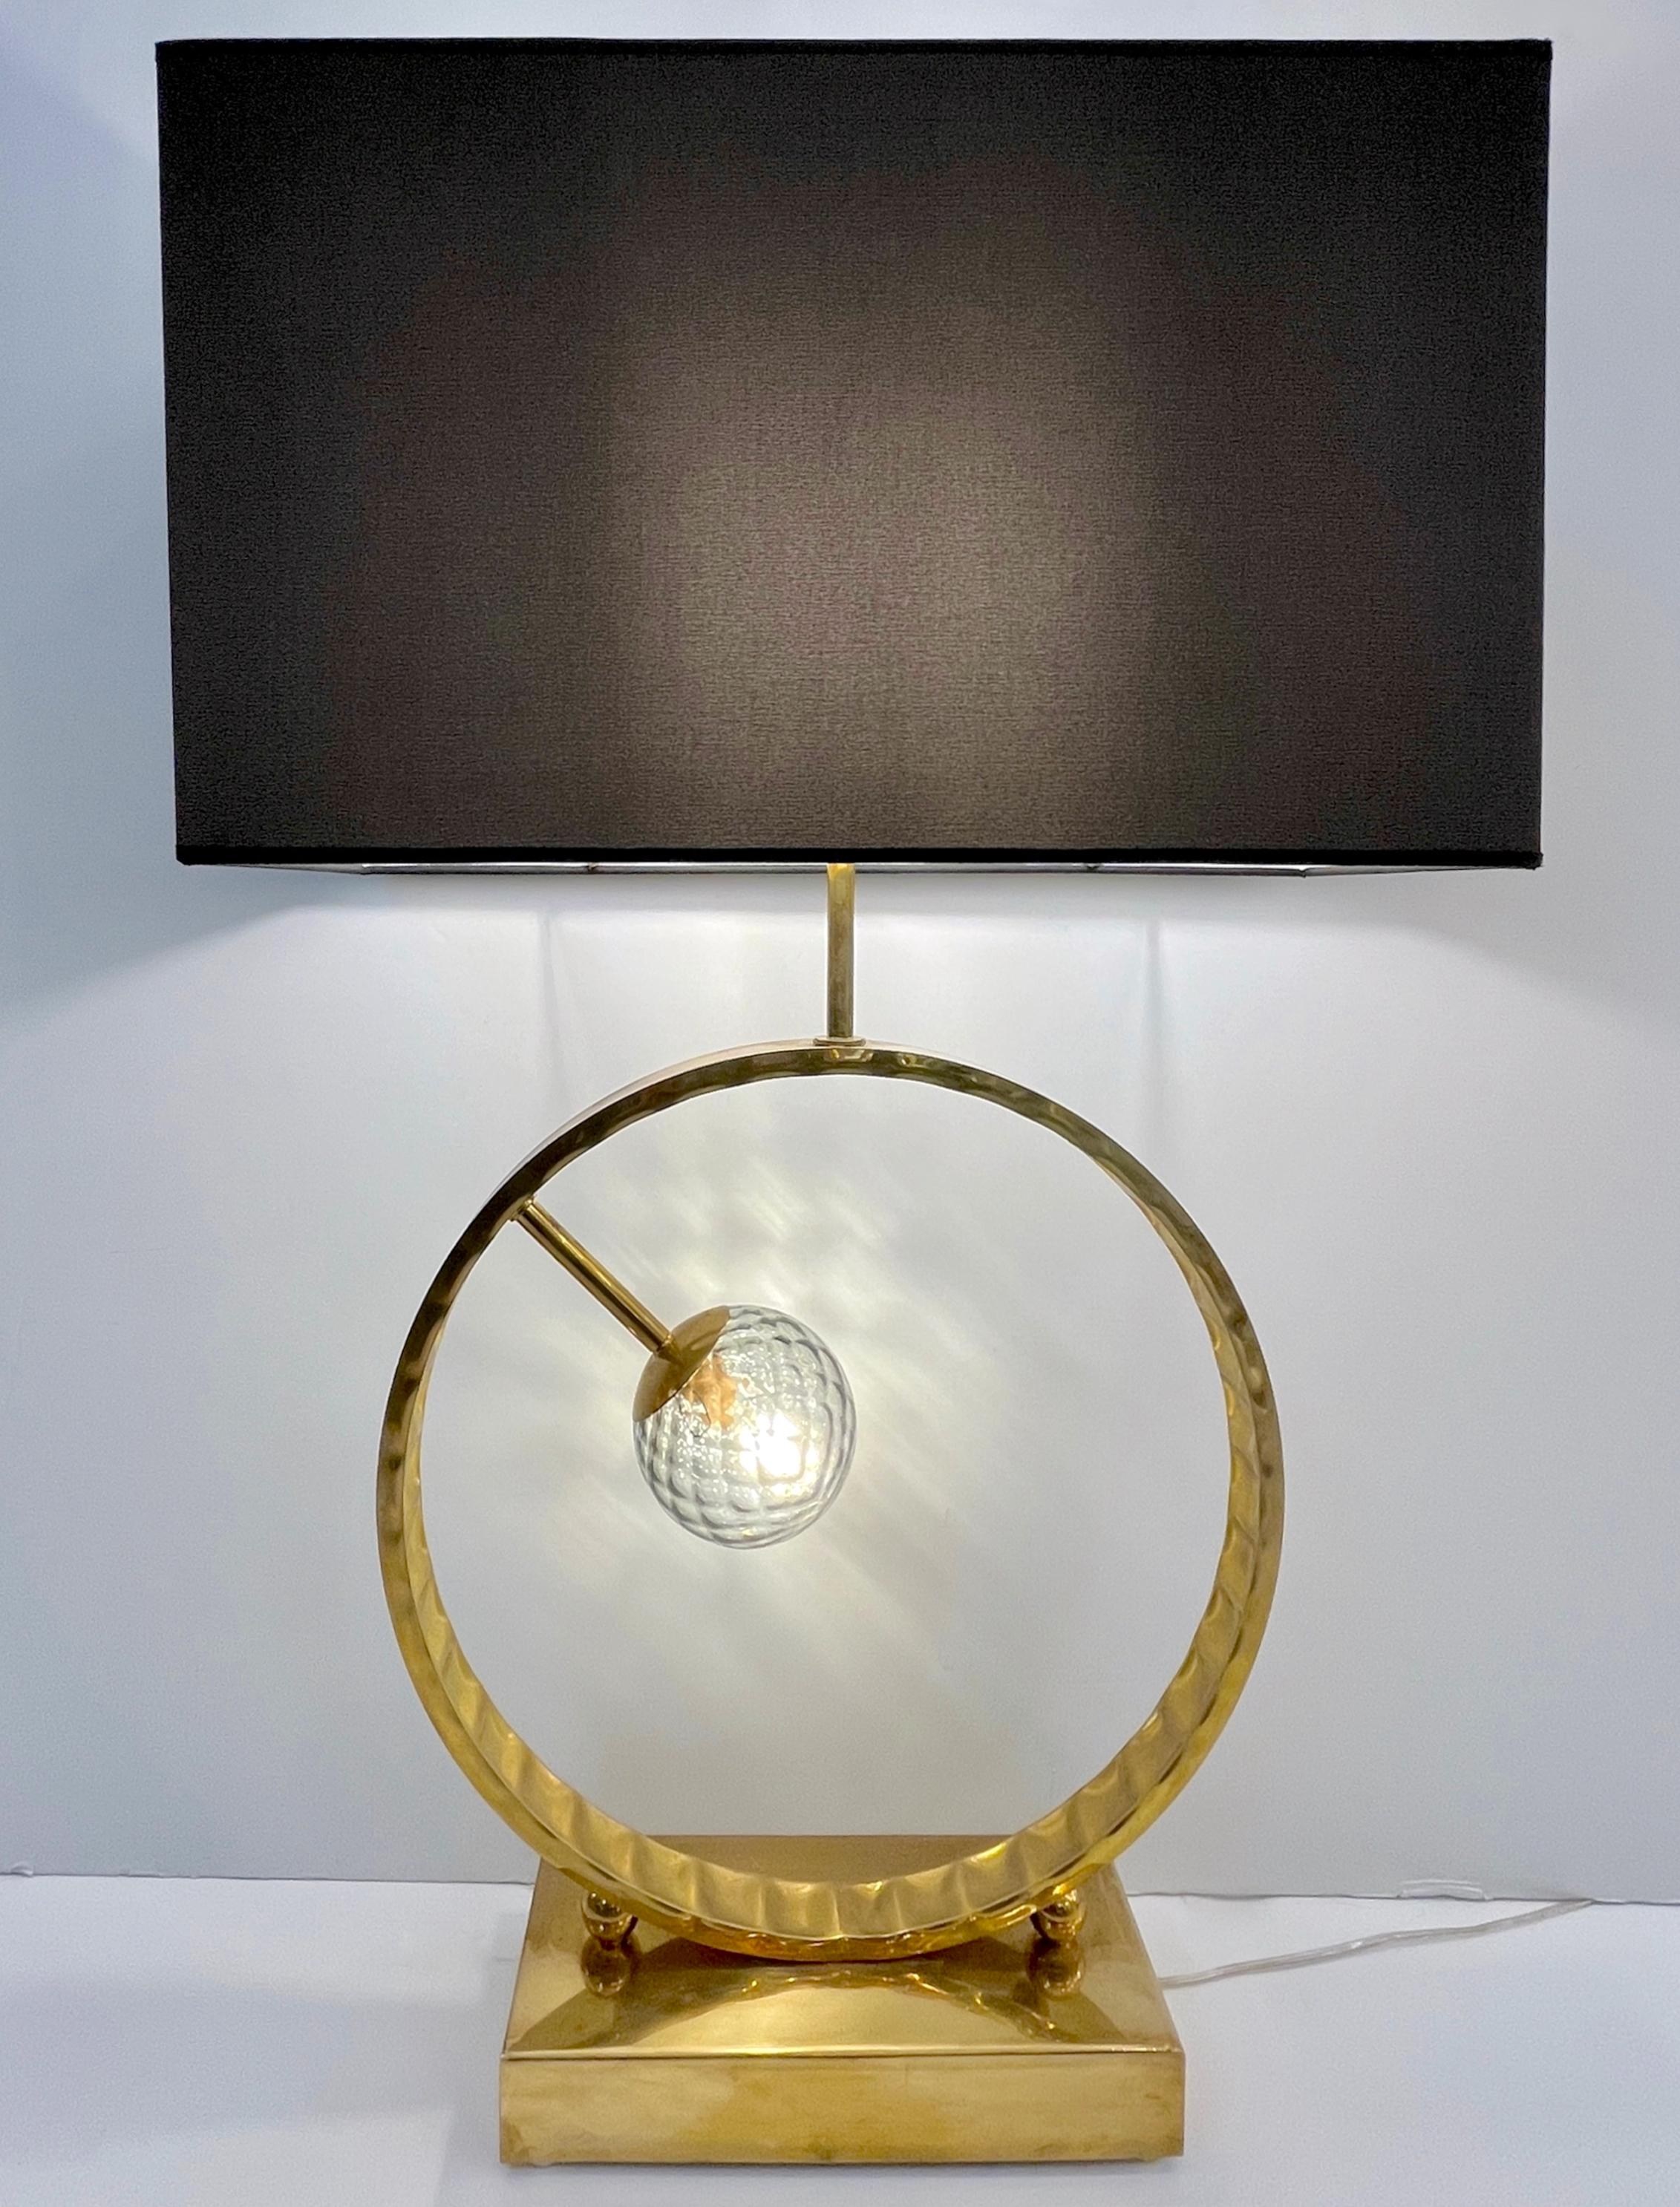 2 Available - The Murano glass globe can be chosen in different colors, see image - A contemporary highly decorative tall table lamp of grand size, entirely handcrafted in Italy, with an enticing minimalist geometric design, the body consisting of